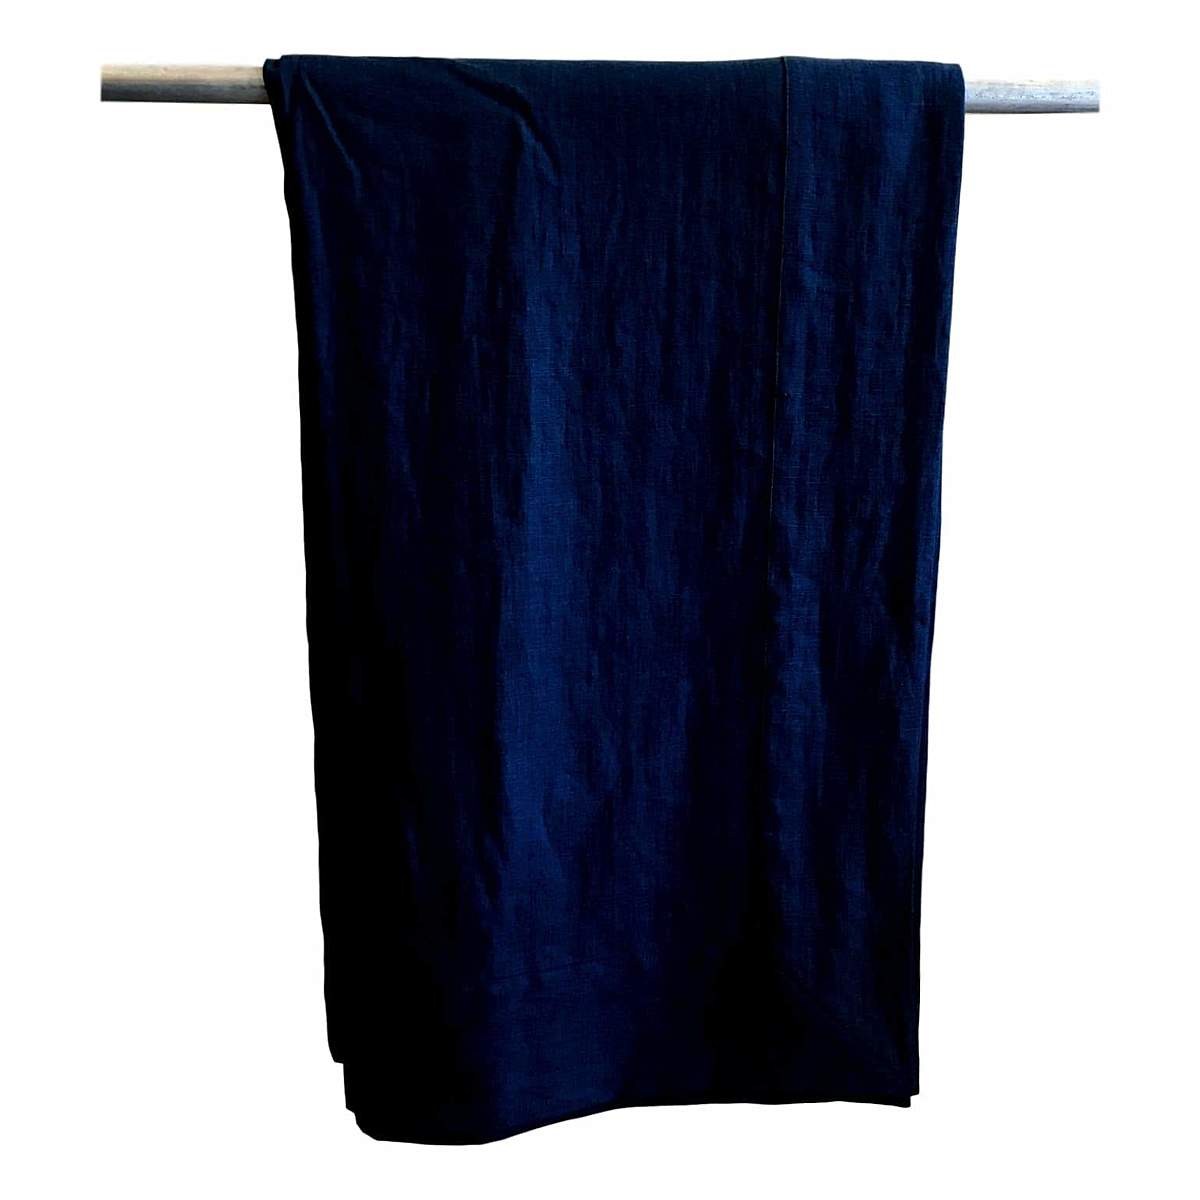 Tablecloth - Softwashed Linen Navy